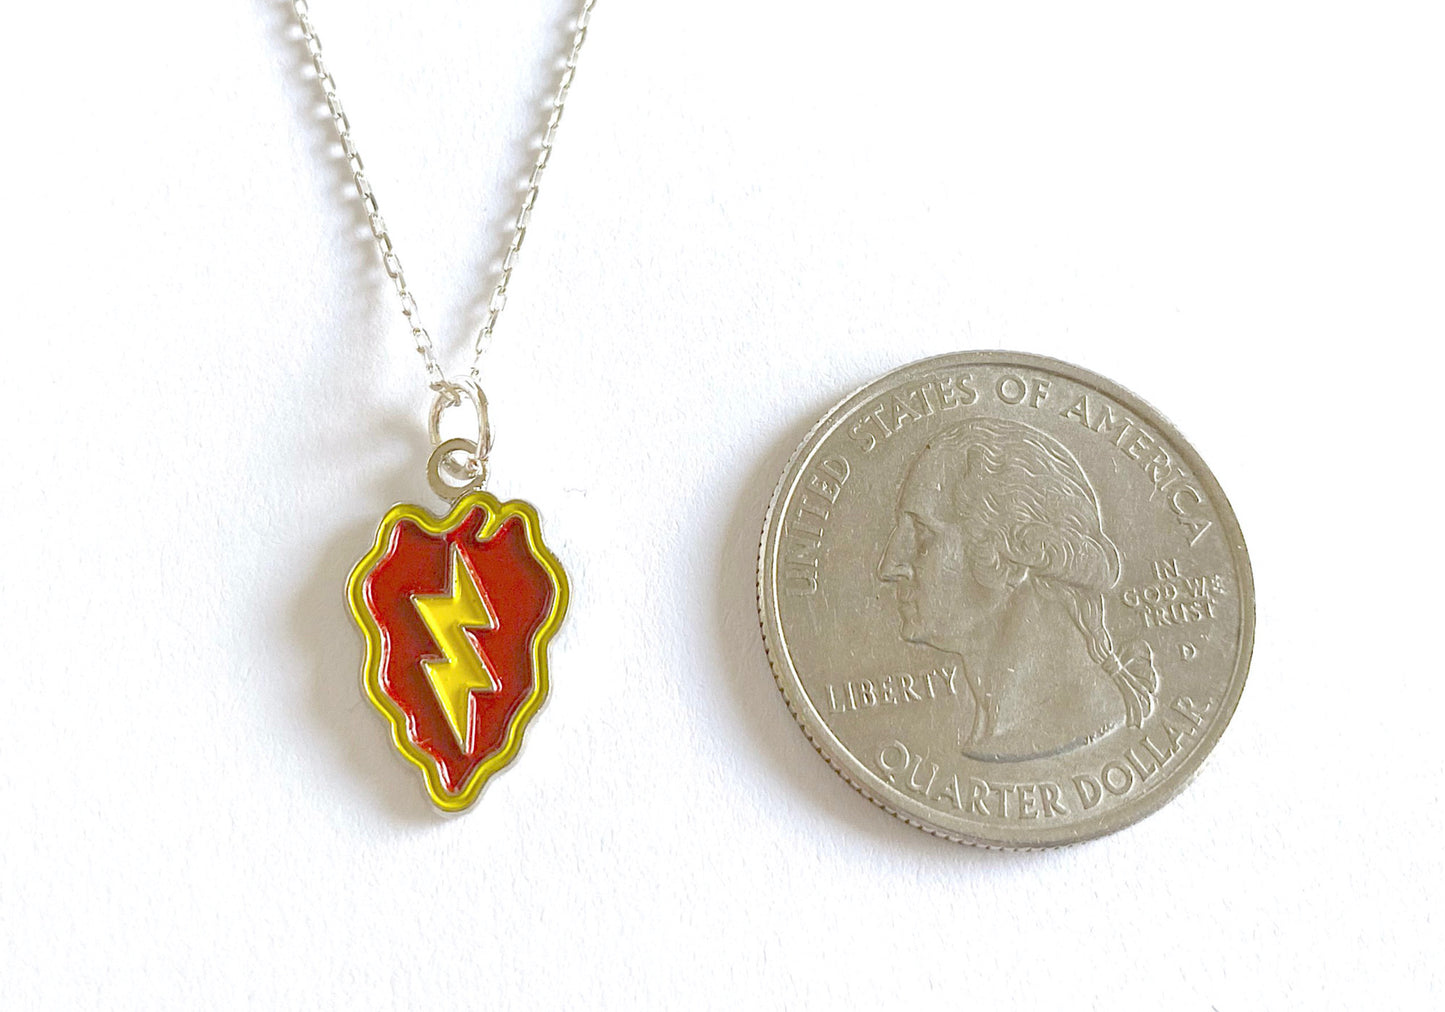 25th Infantry Division Charm Necklace